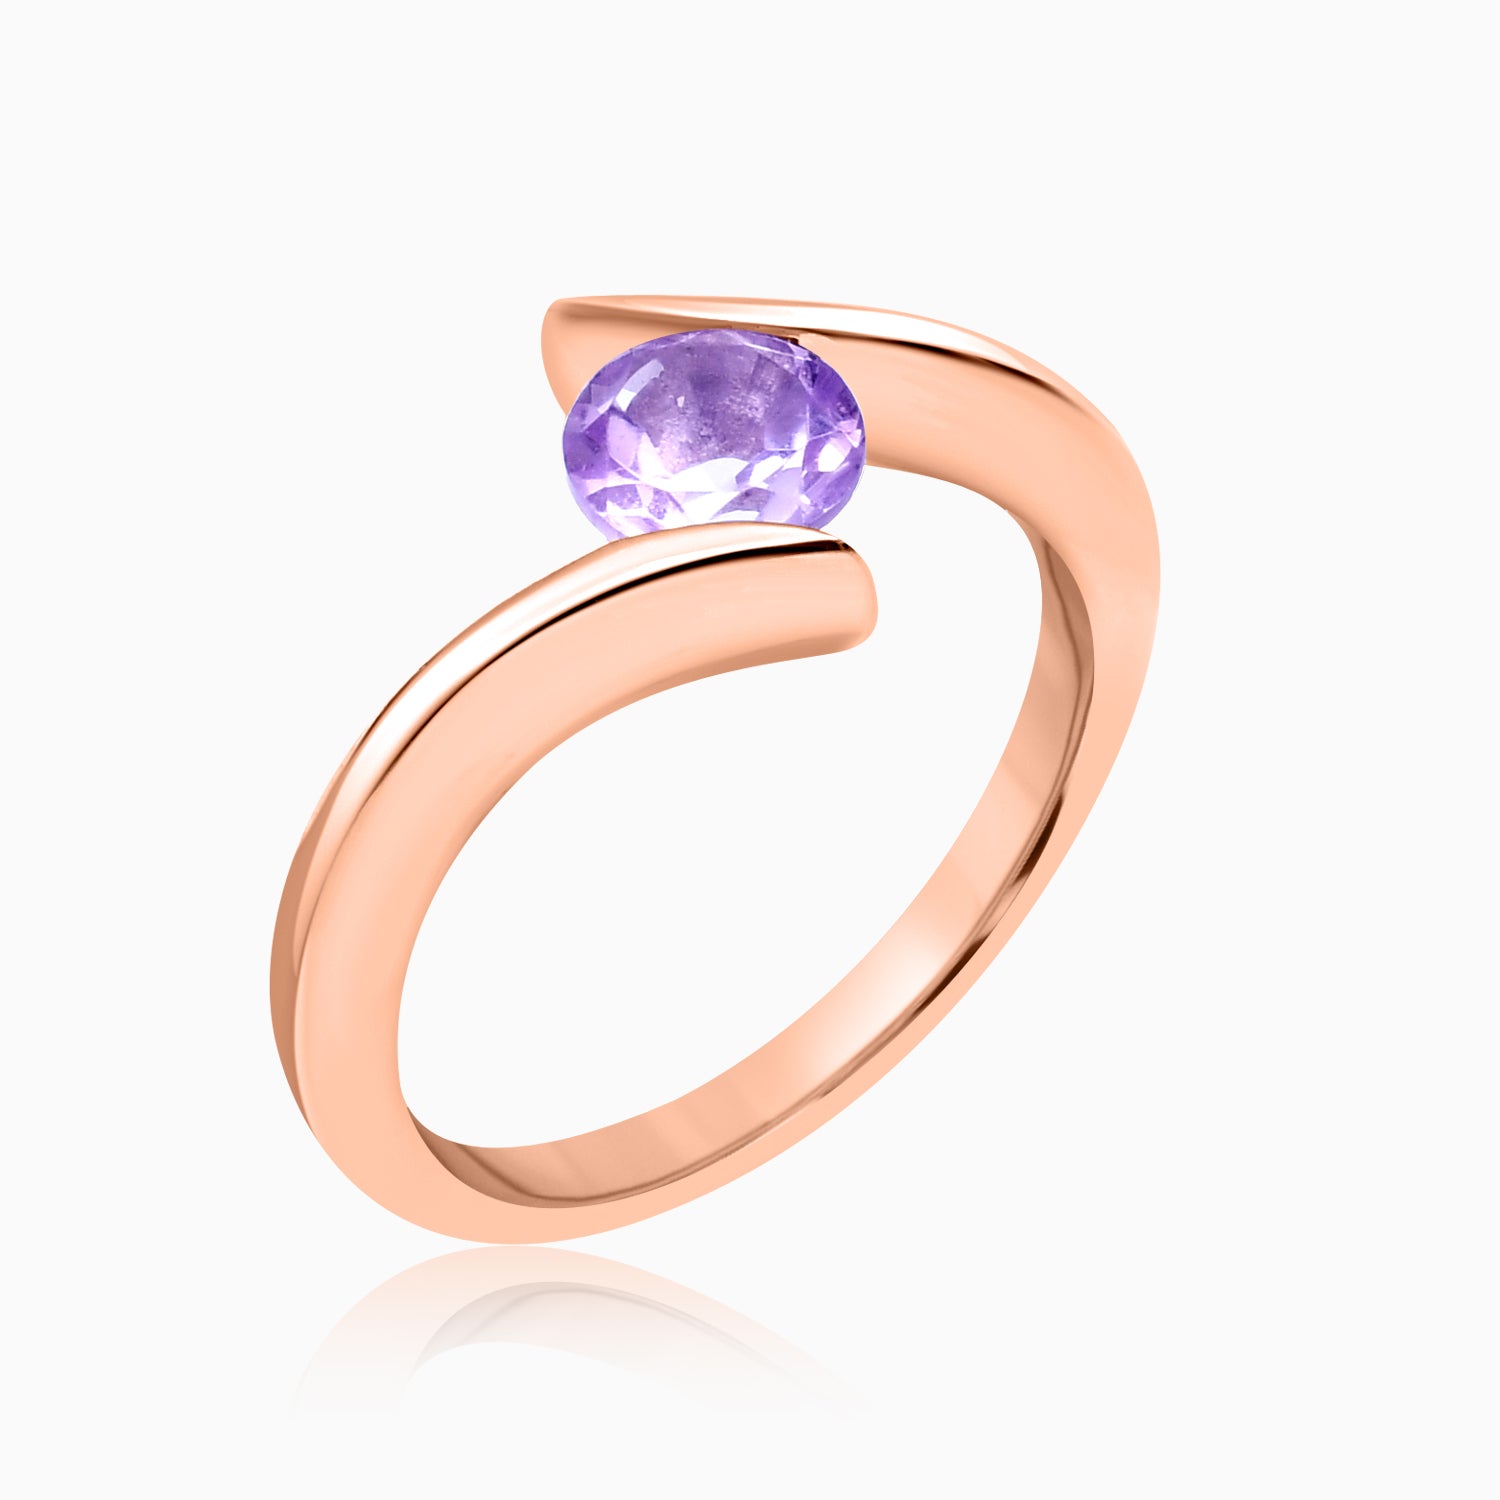 Silver Rose Gold Amethyst Embrace Ring